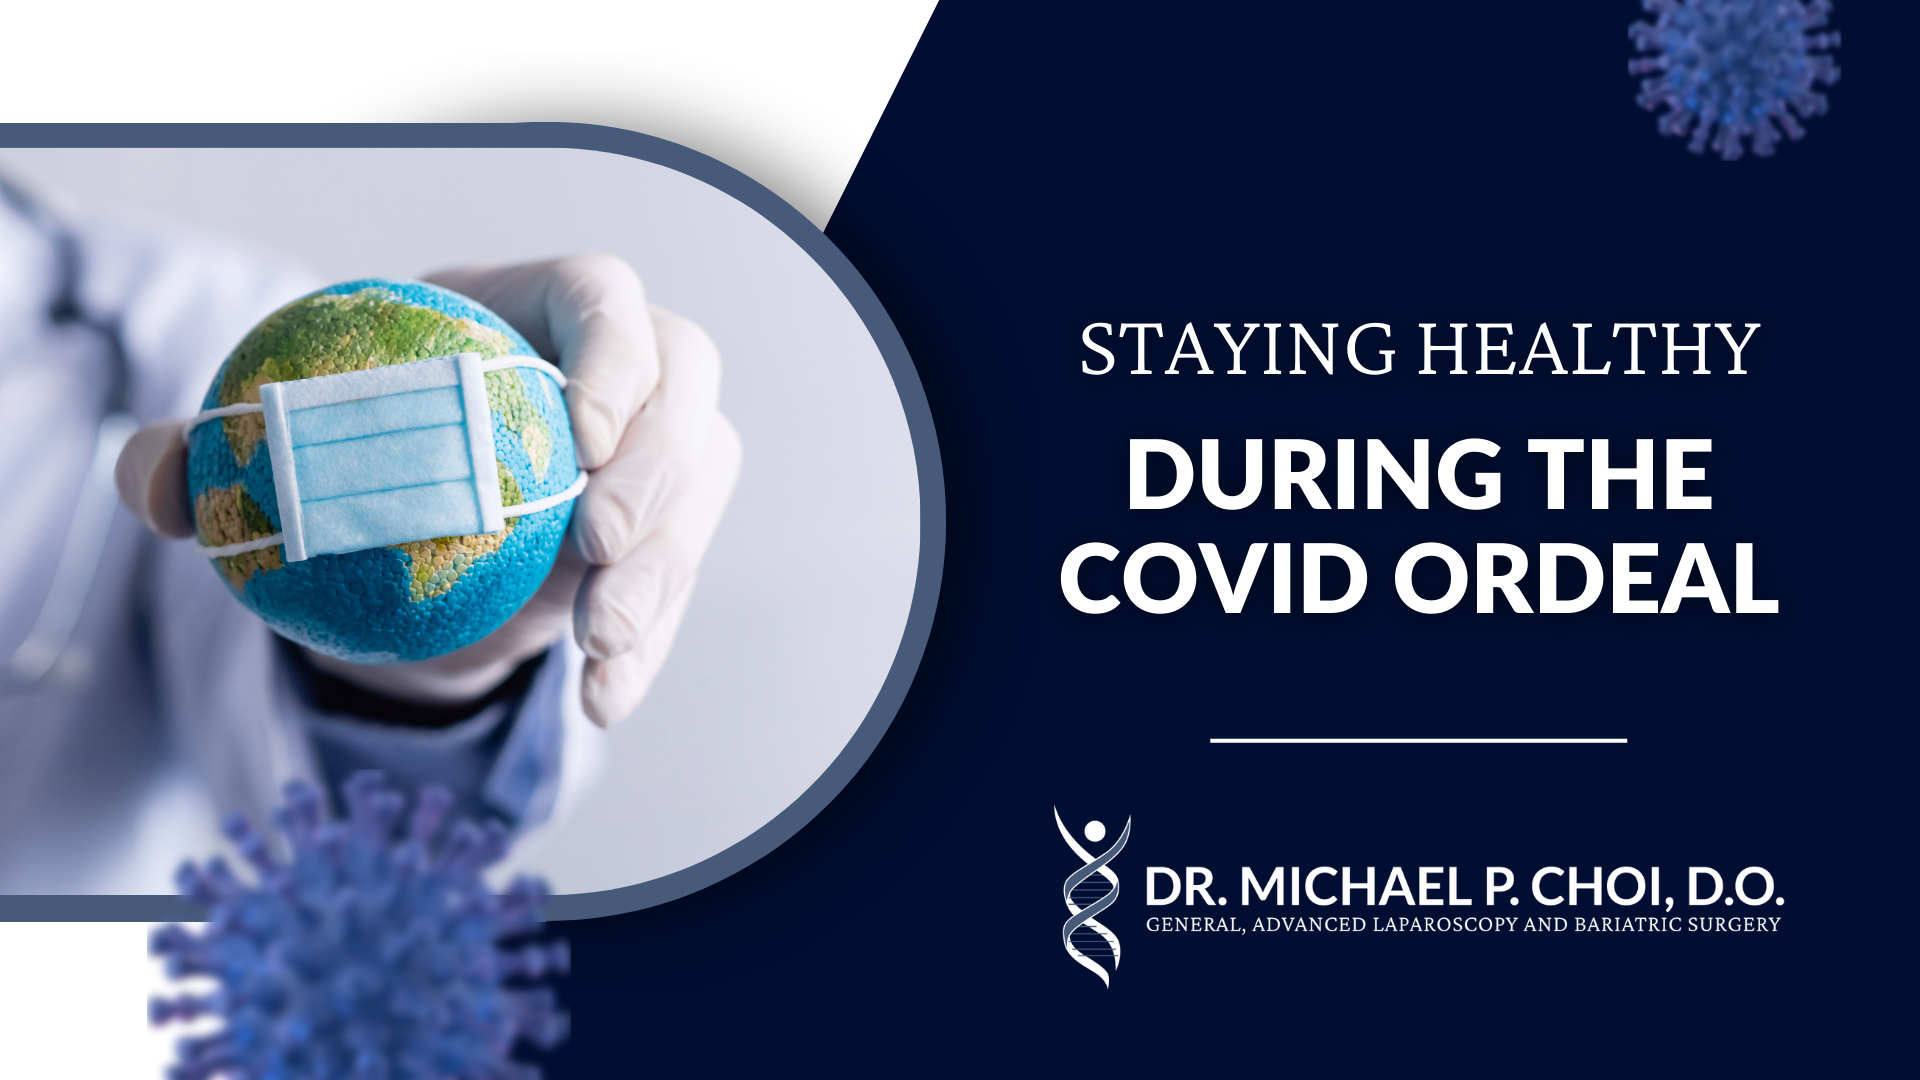 STAYING HEALTHY DURING THE COVID ORDEAL